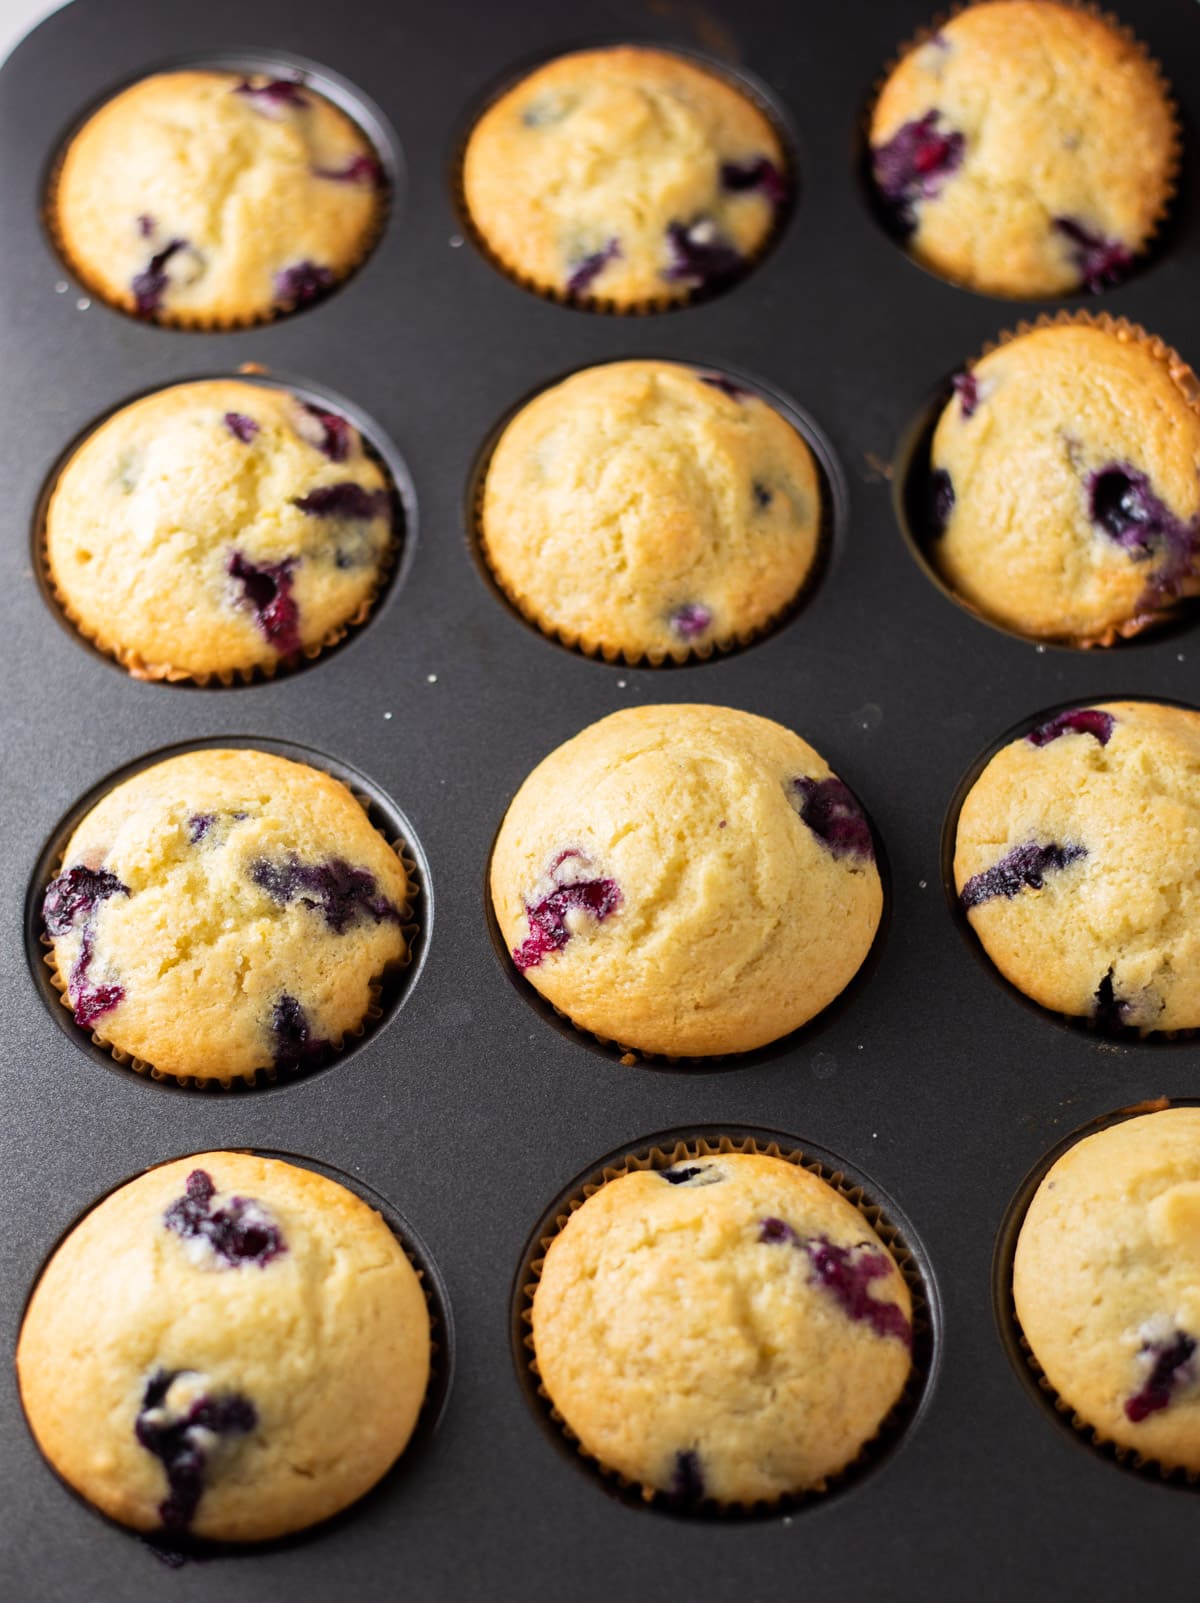 Blueberry muffins baked in a 12-count muffin pan